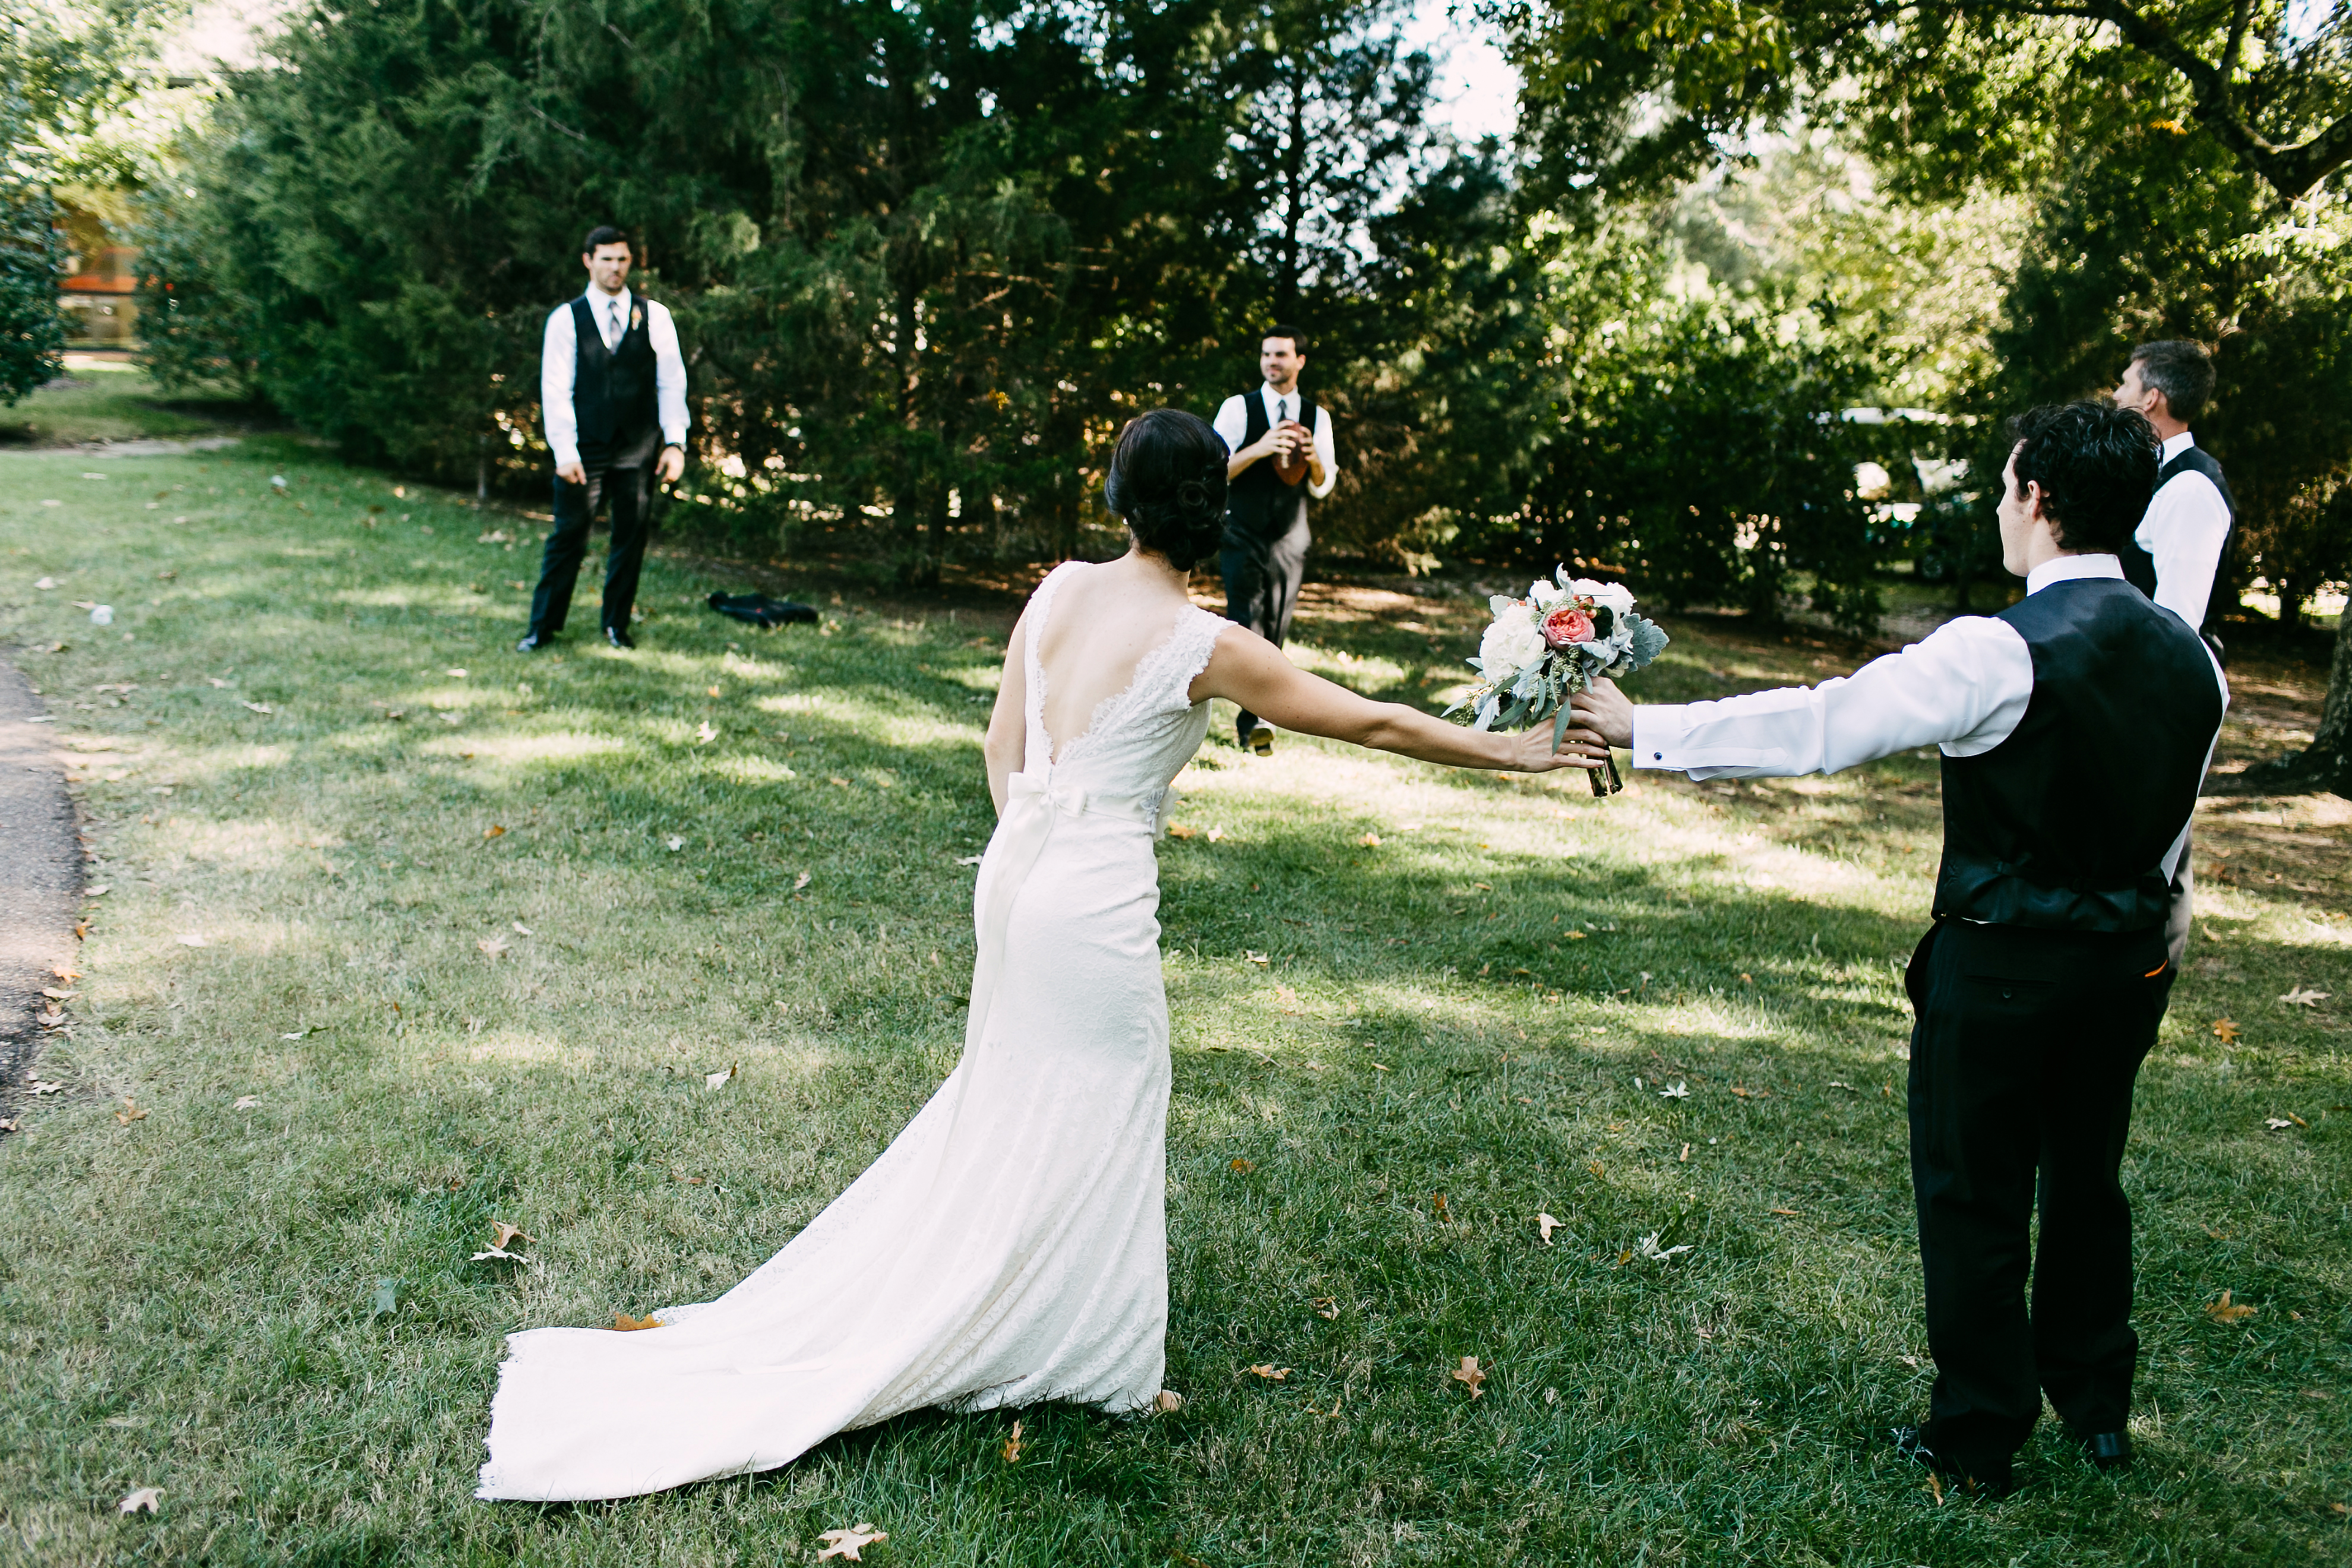 Gotta love a bride who wants to play ball on her wedding day.